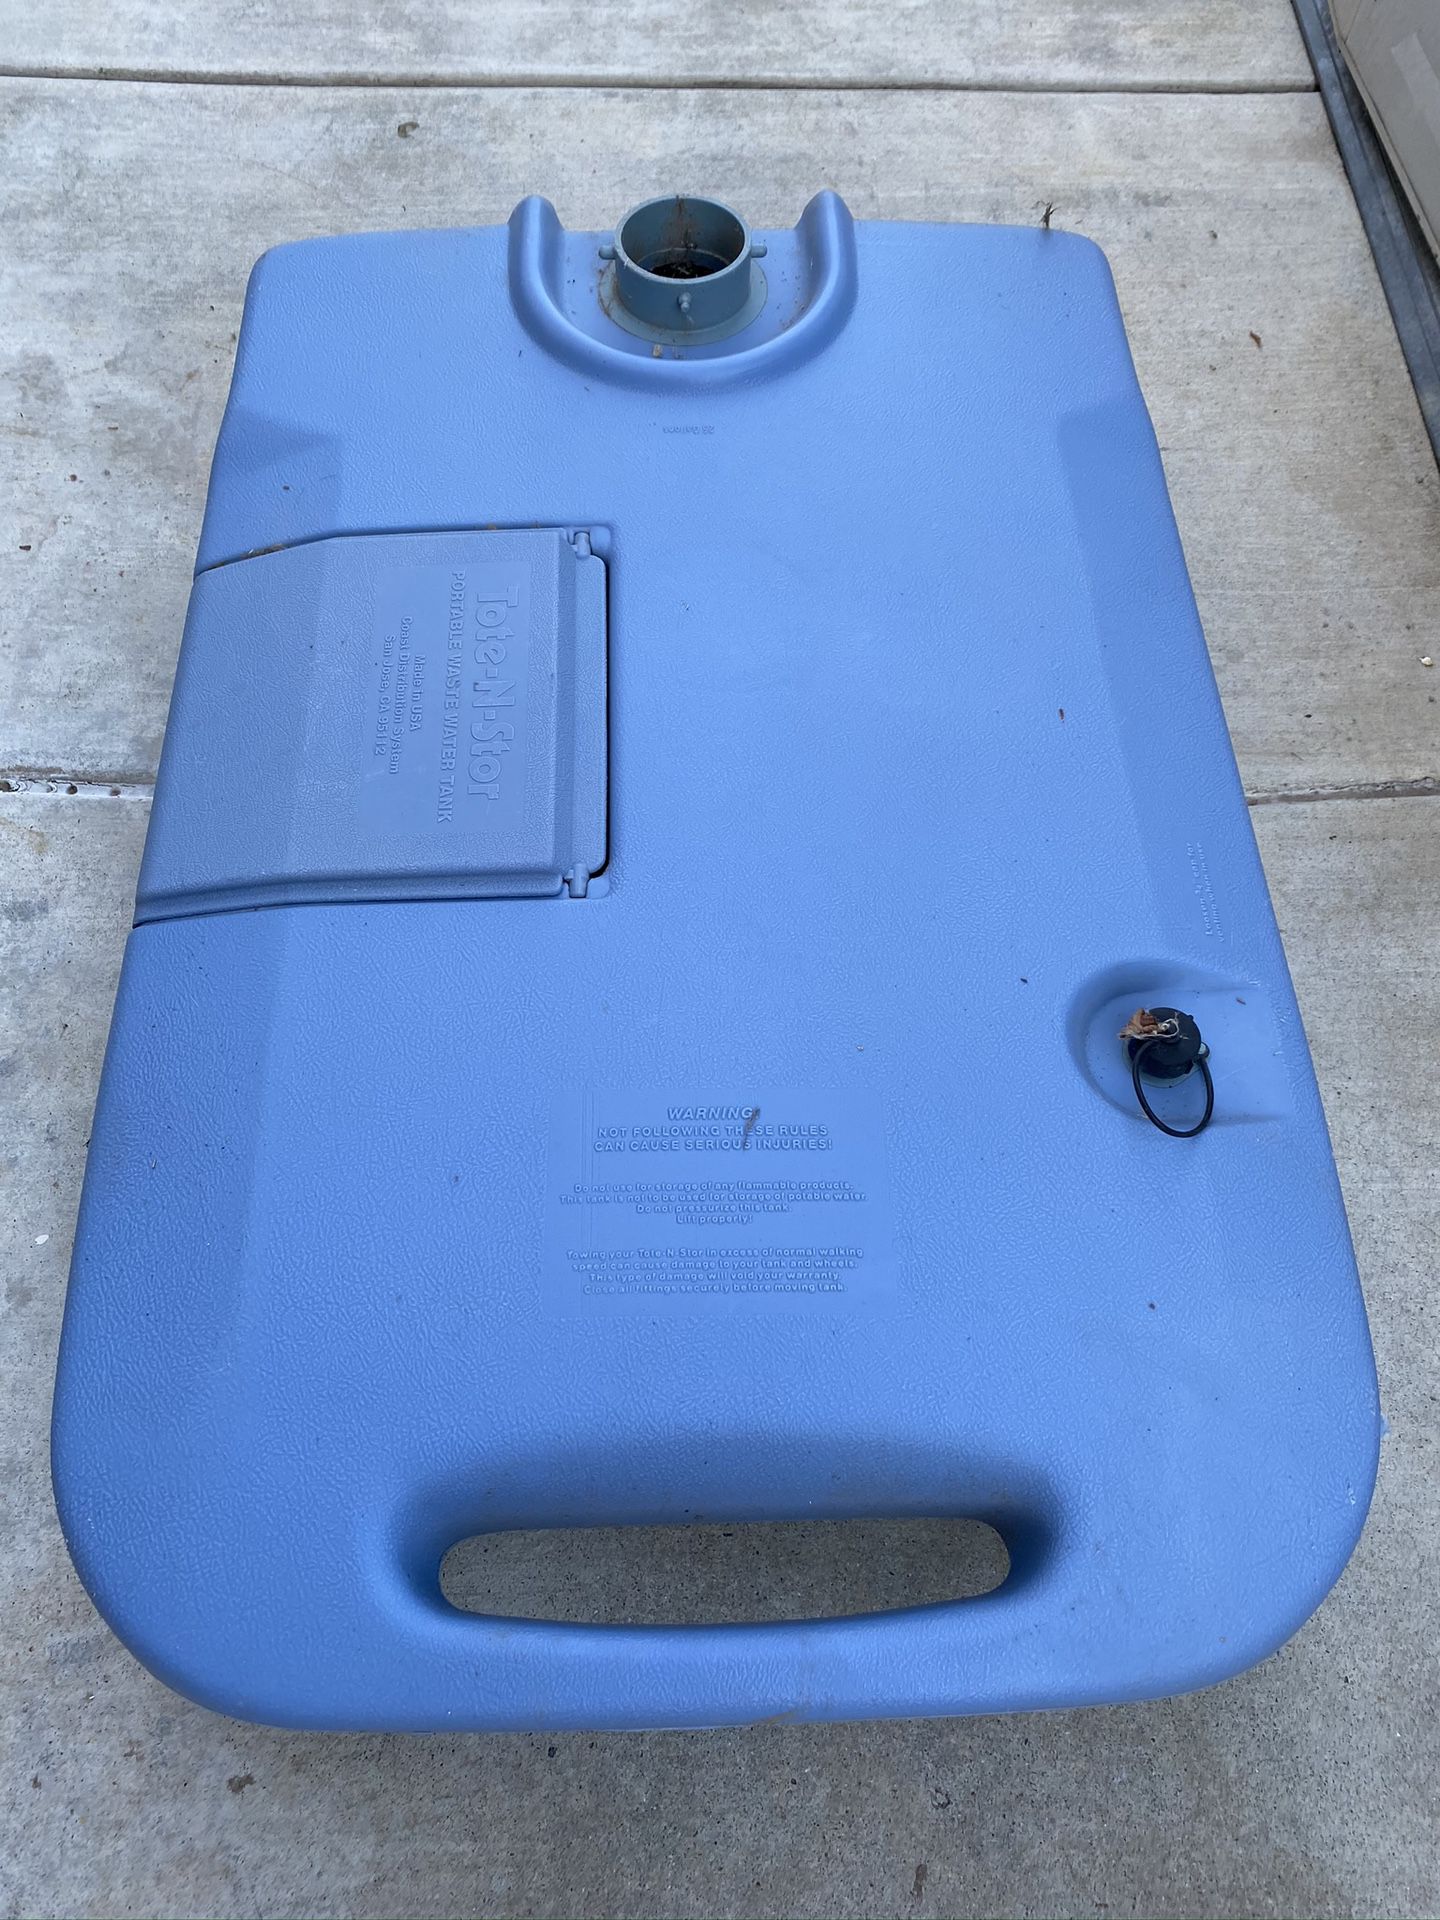 TOTE-N-STOR PORTABLE RV WASTEWATER TANK